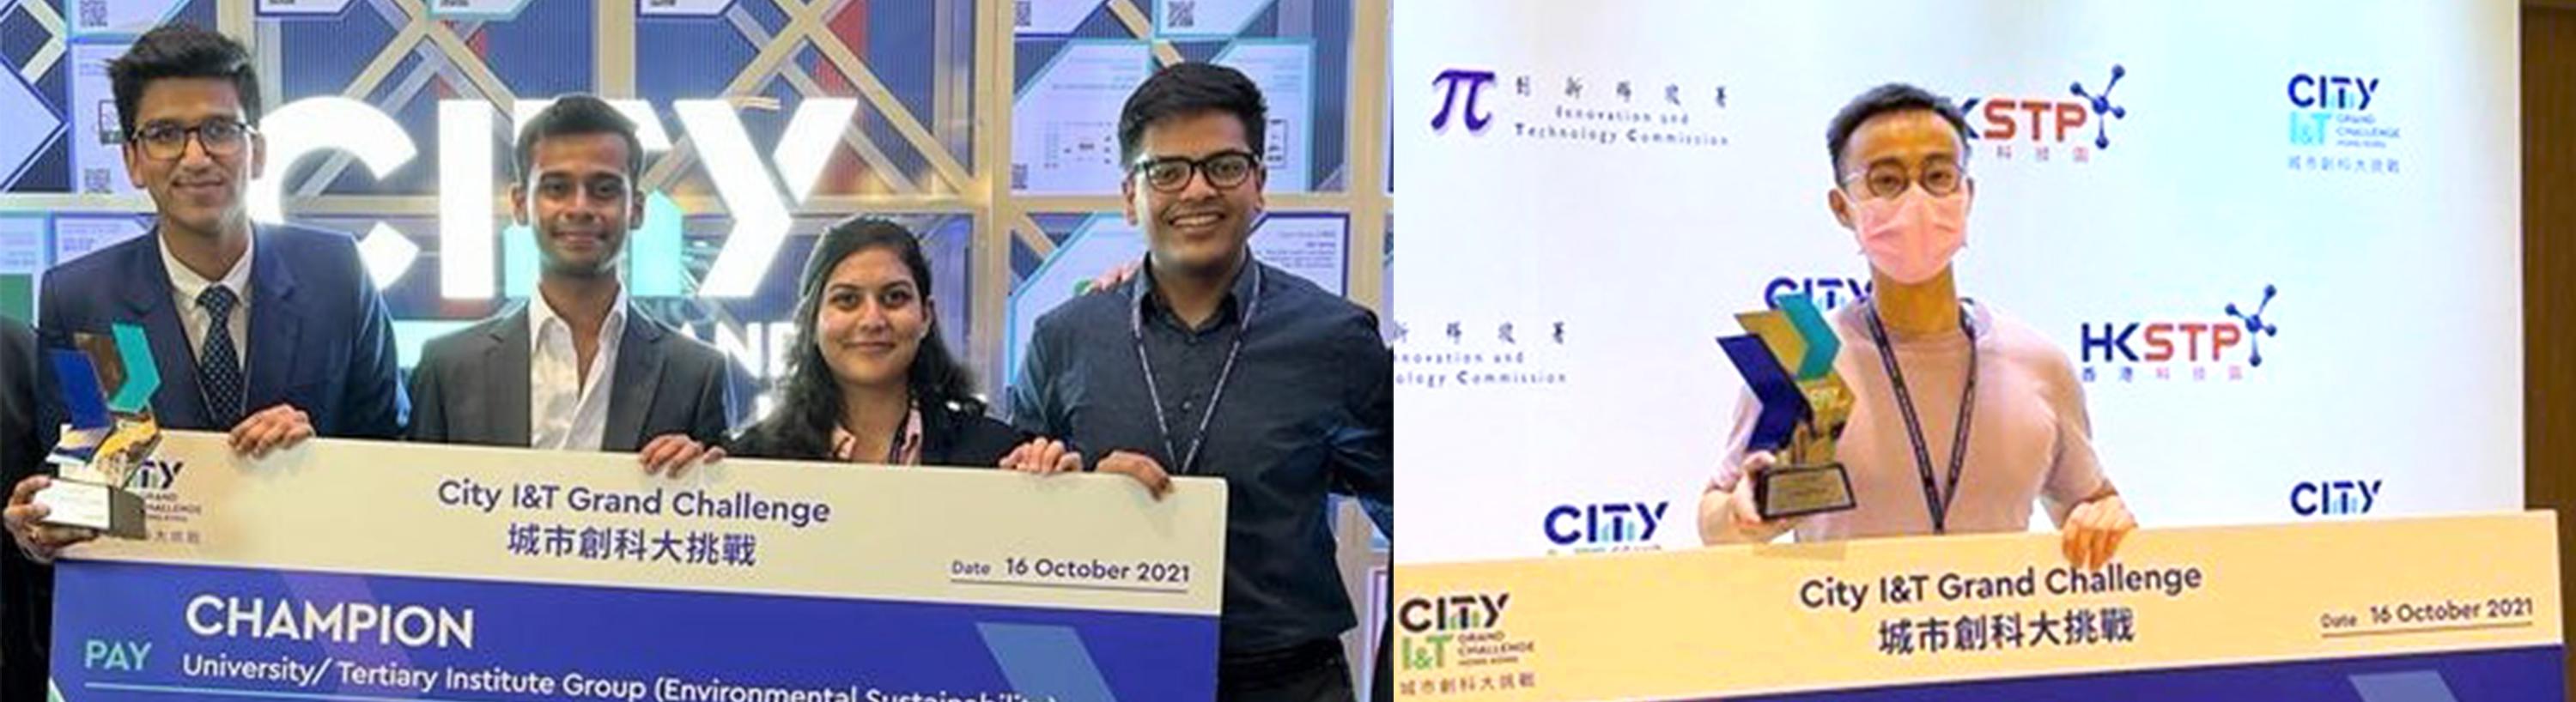 HKUST Student Teams Won Two Champions in First-Ever “City I&T Grand Challenge”